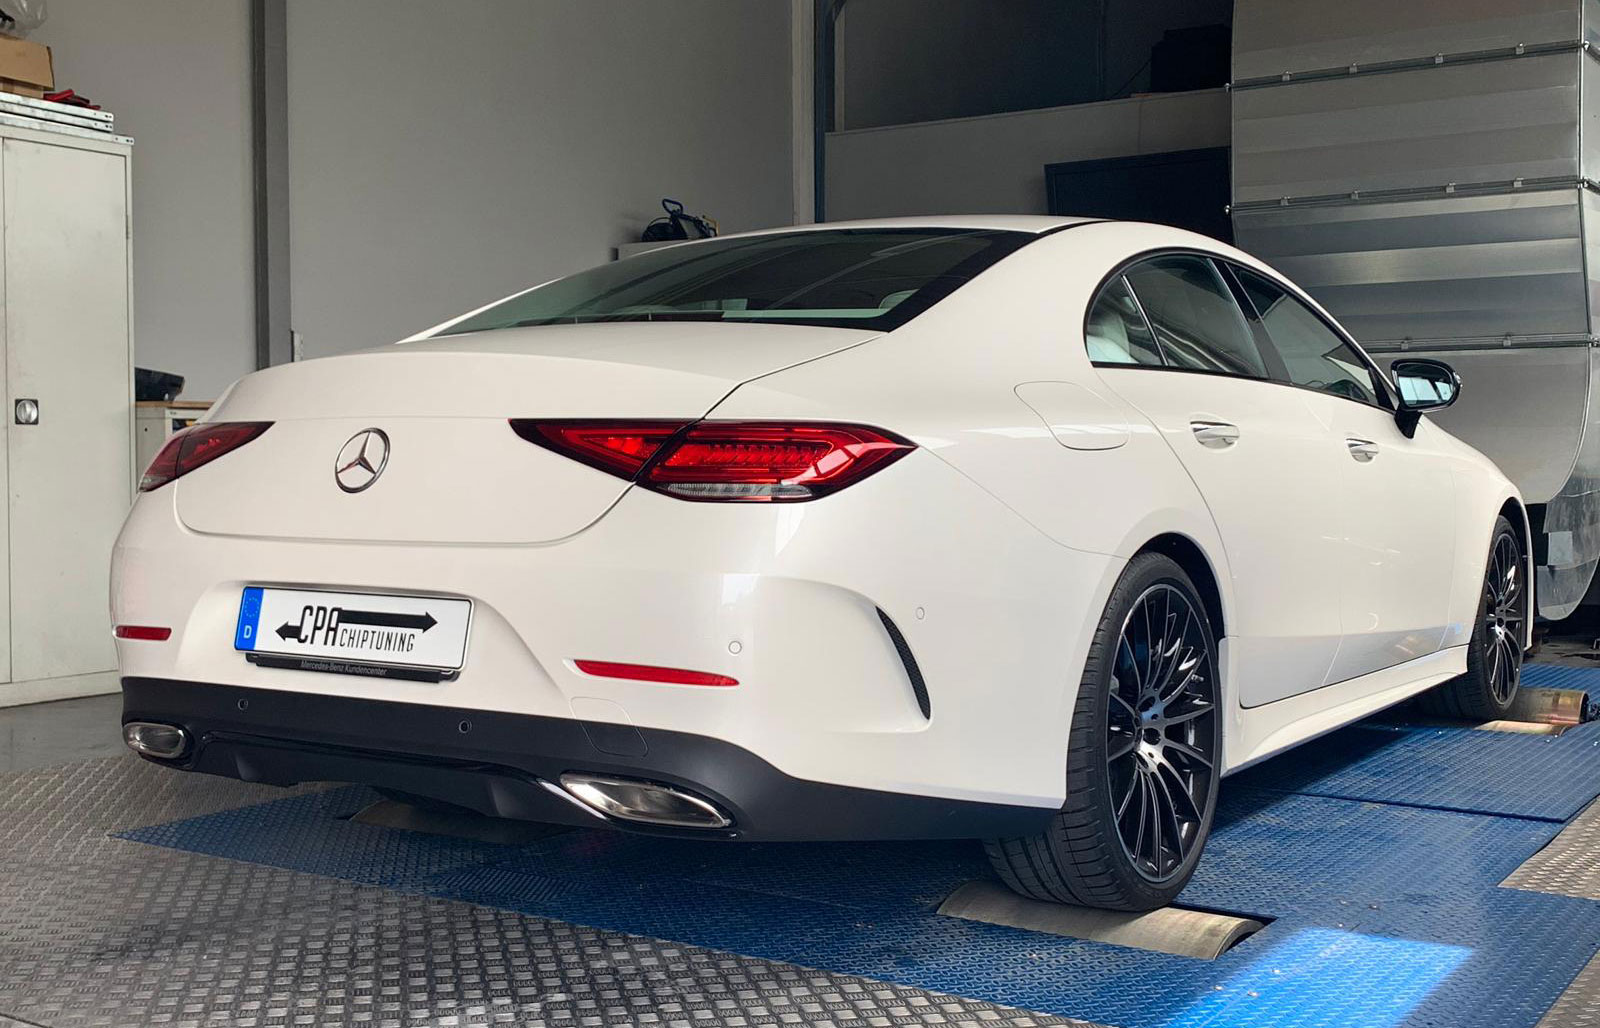 On the dyno: Mercedes CLS (C257) 450